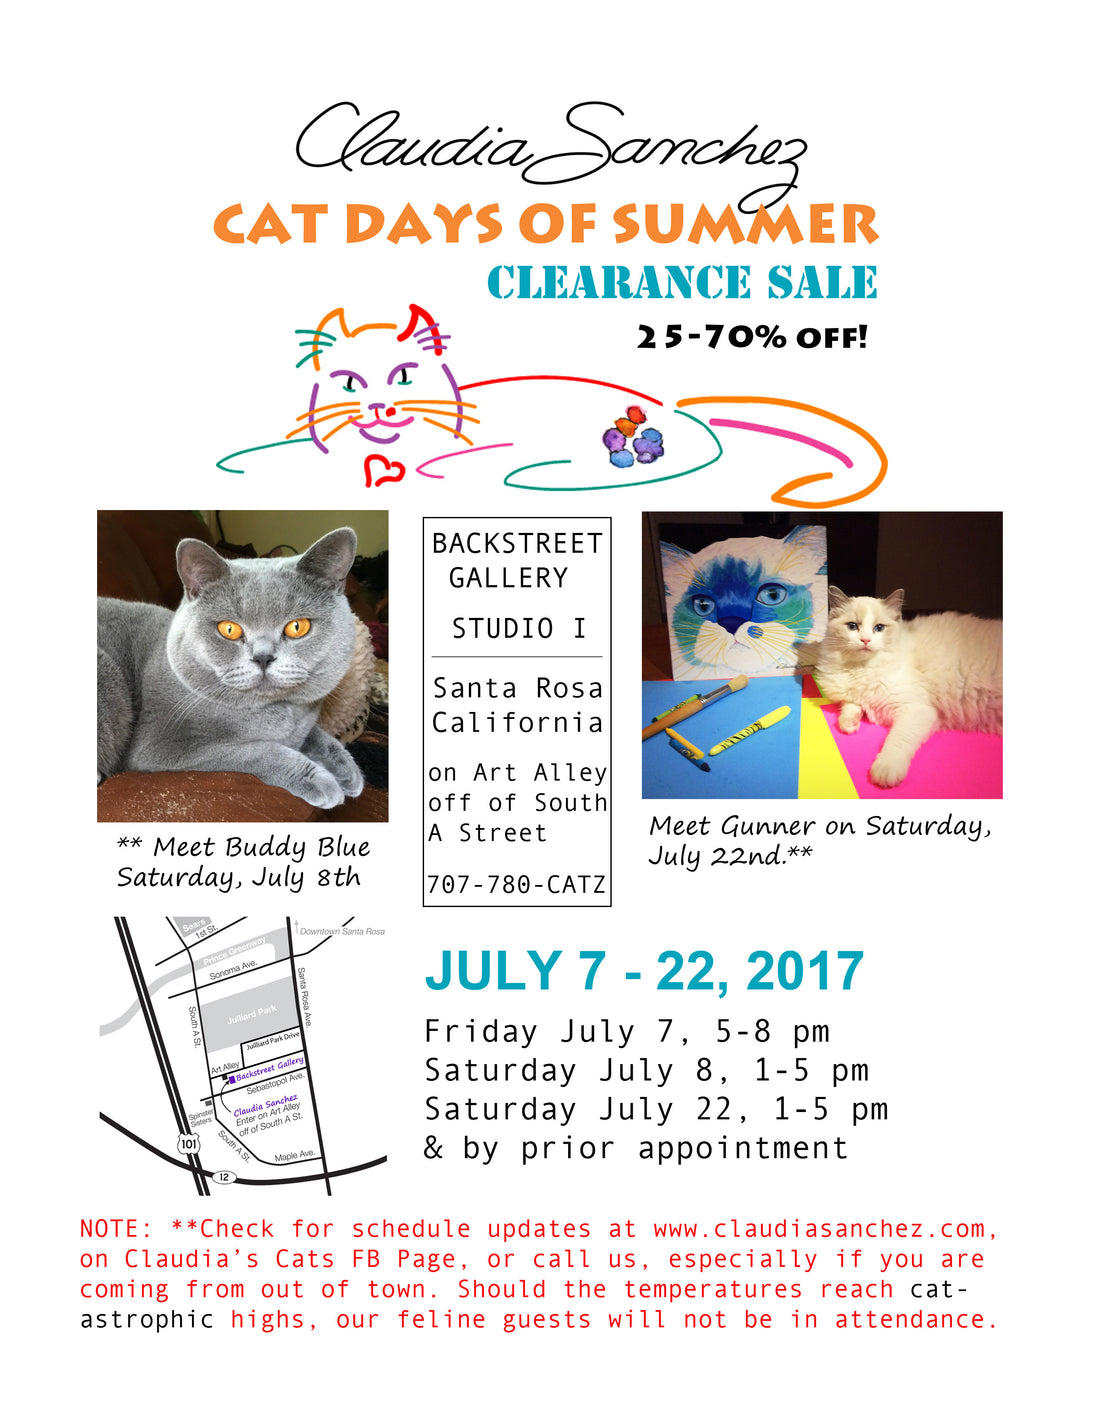 Claudia's CAT DAYS OF SUMMER SALE - JULY 2017 at Backstreet Gallery